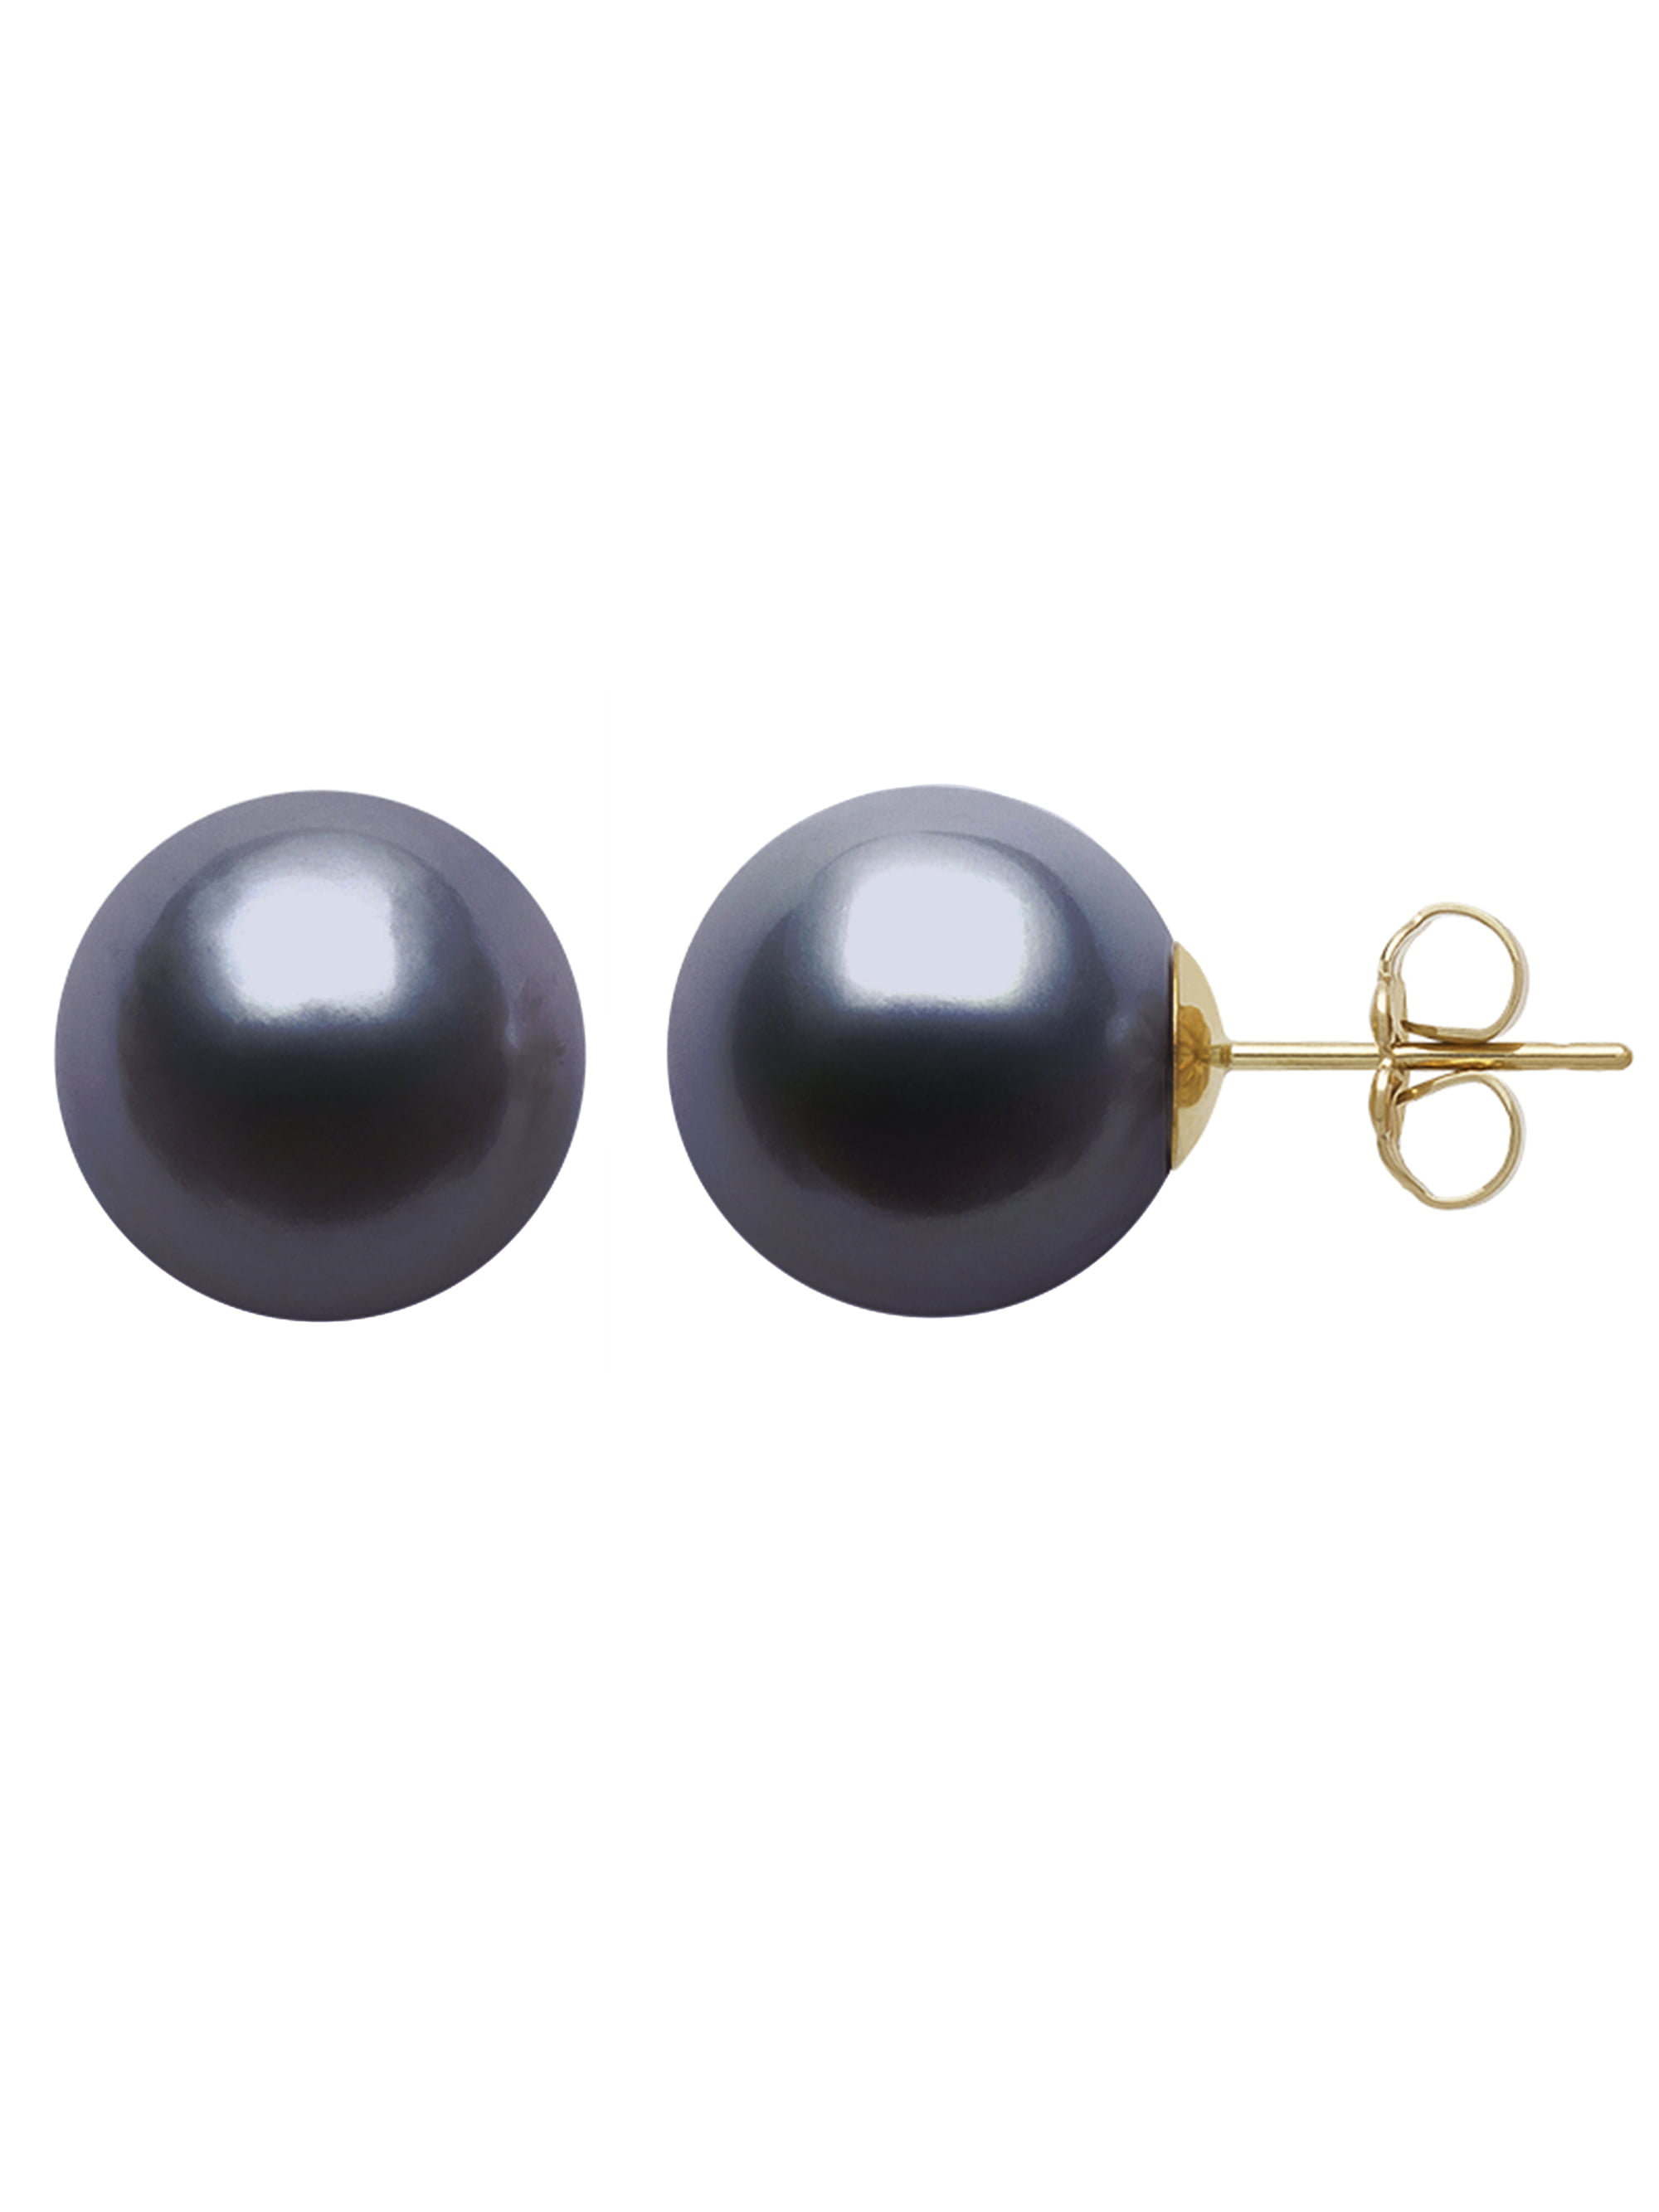 Cultured Freshwater Black Pearl AAA Quality Stud Earring in 14KT Yellow Gold